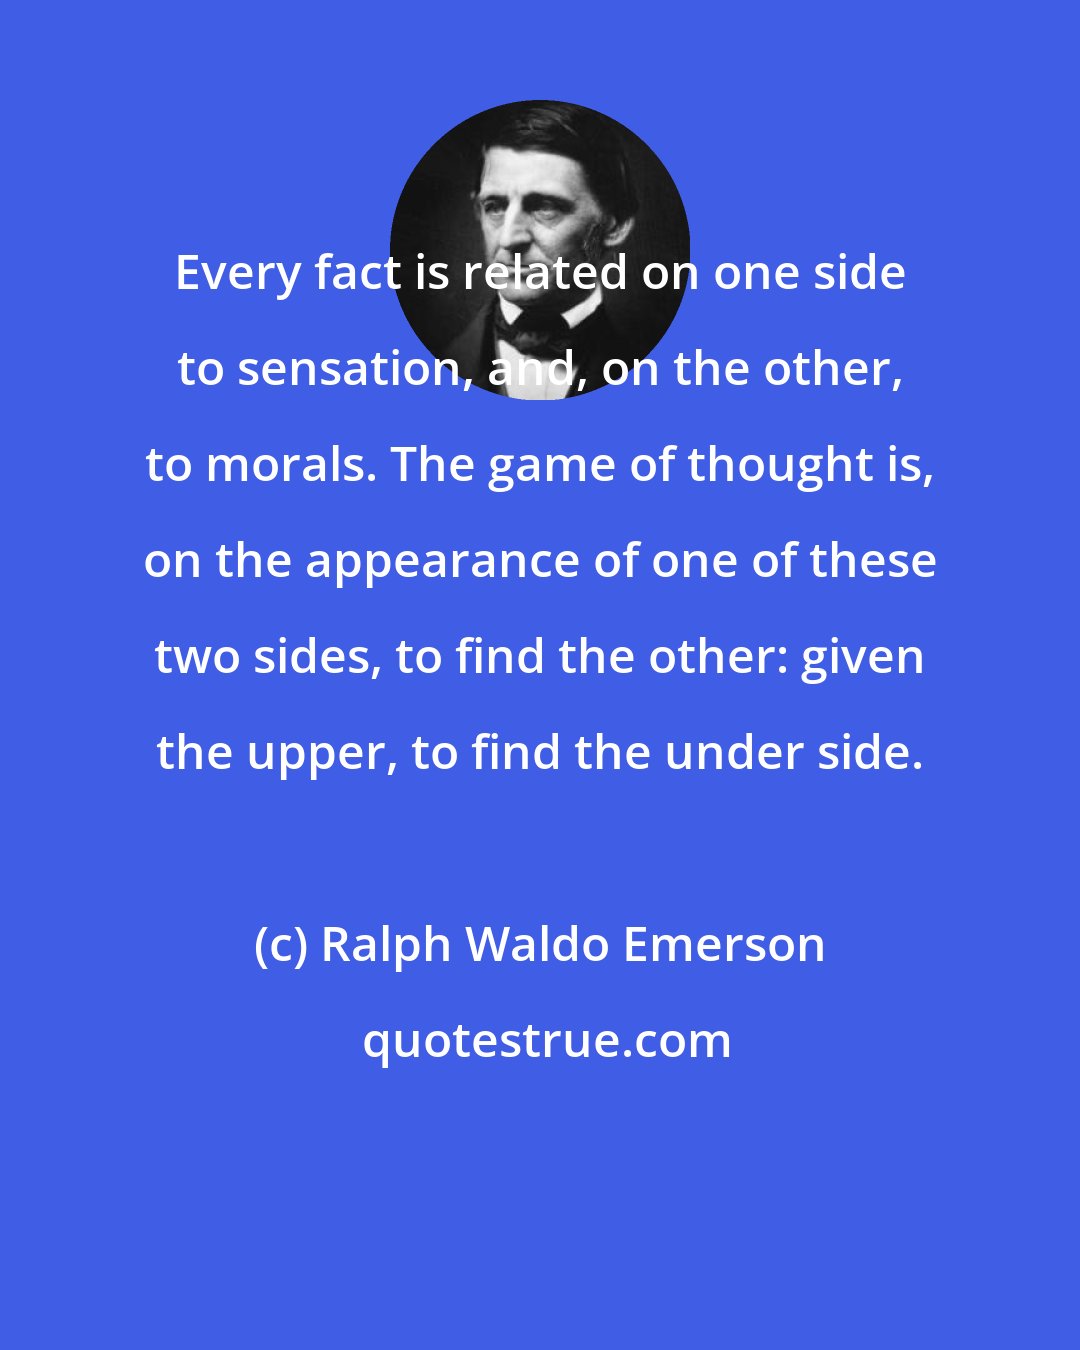 Ralph Waldo Emerson: Every fact is related on one side to sensation, and, on the other, to morals. The game of thought is, on the appearance of one of these two sides, to find the other: given the upper, to find the under side.